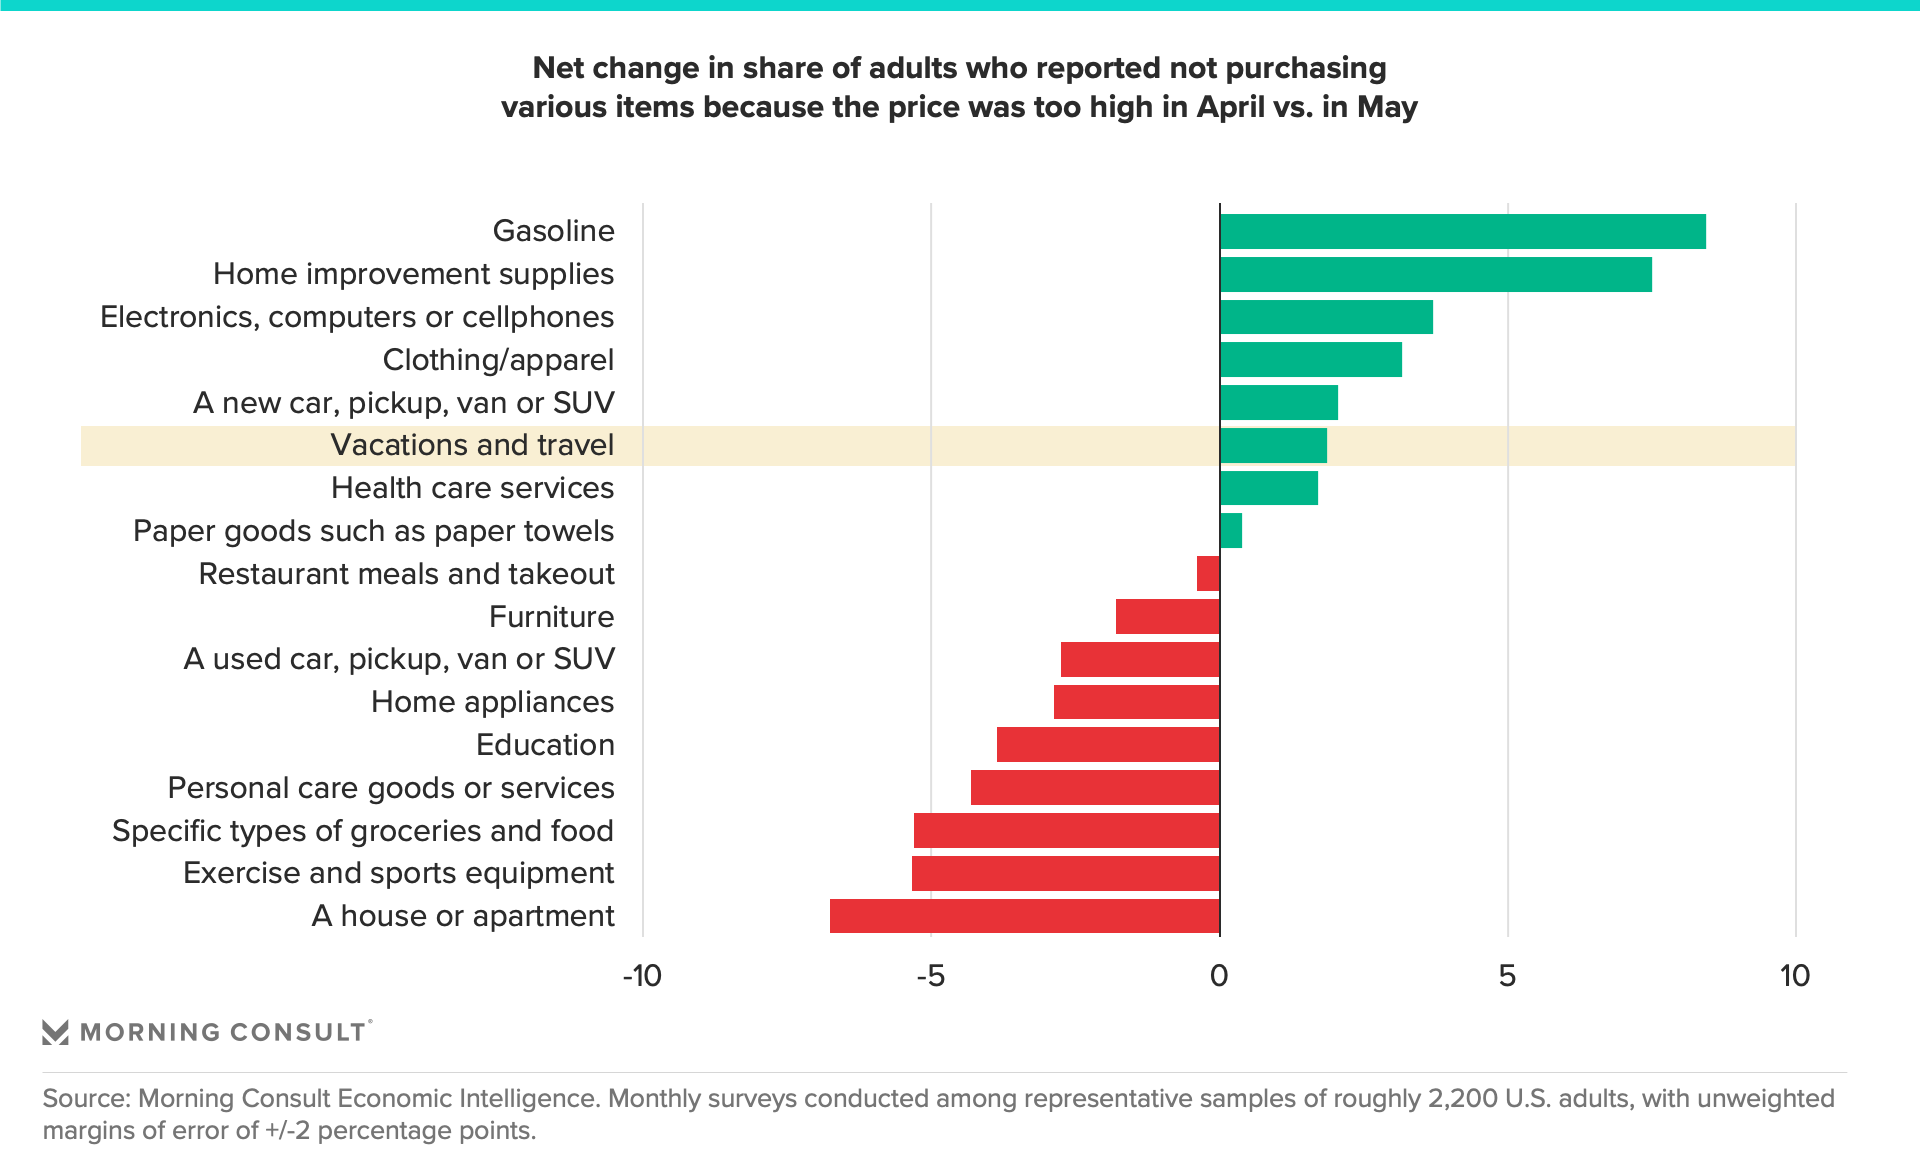 Chart showing net change in the share of adults who reported not purchasing various items because the price was too high in April 2022 versus May 2022